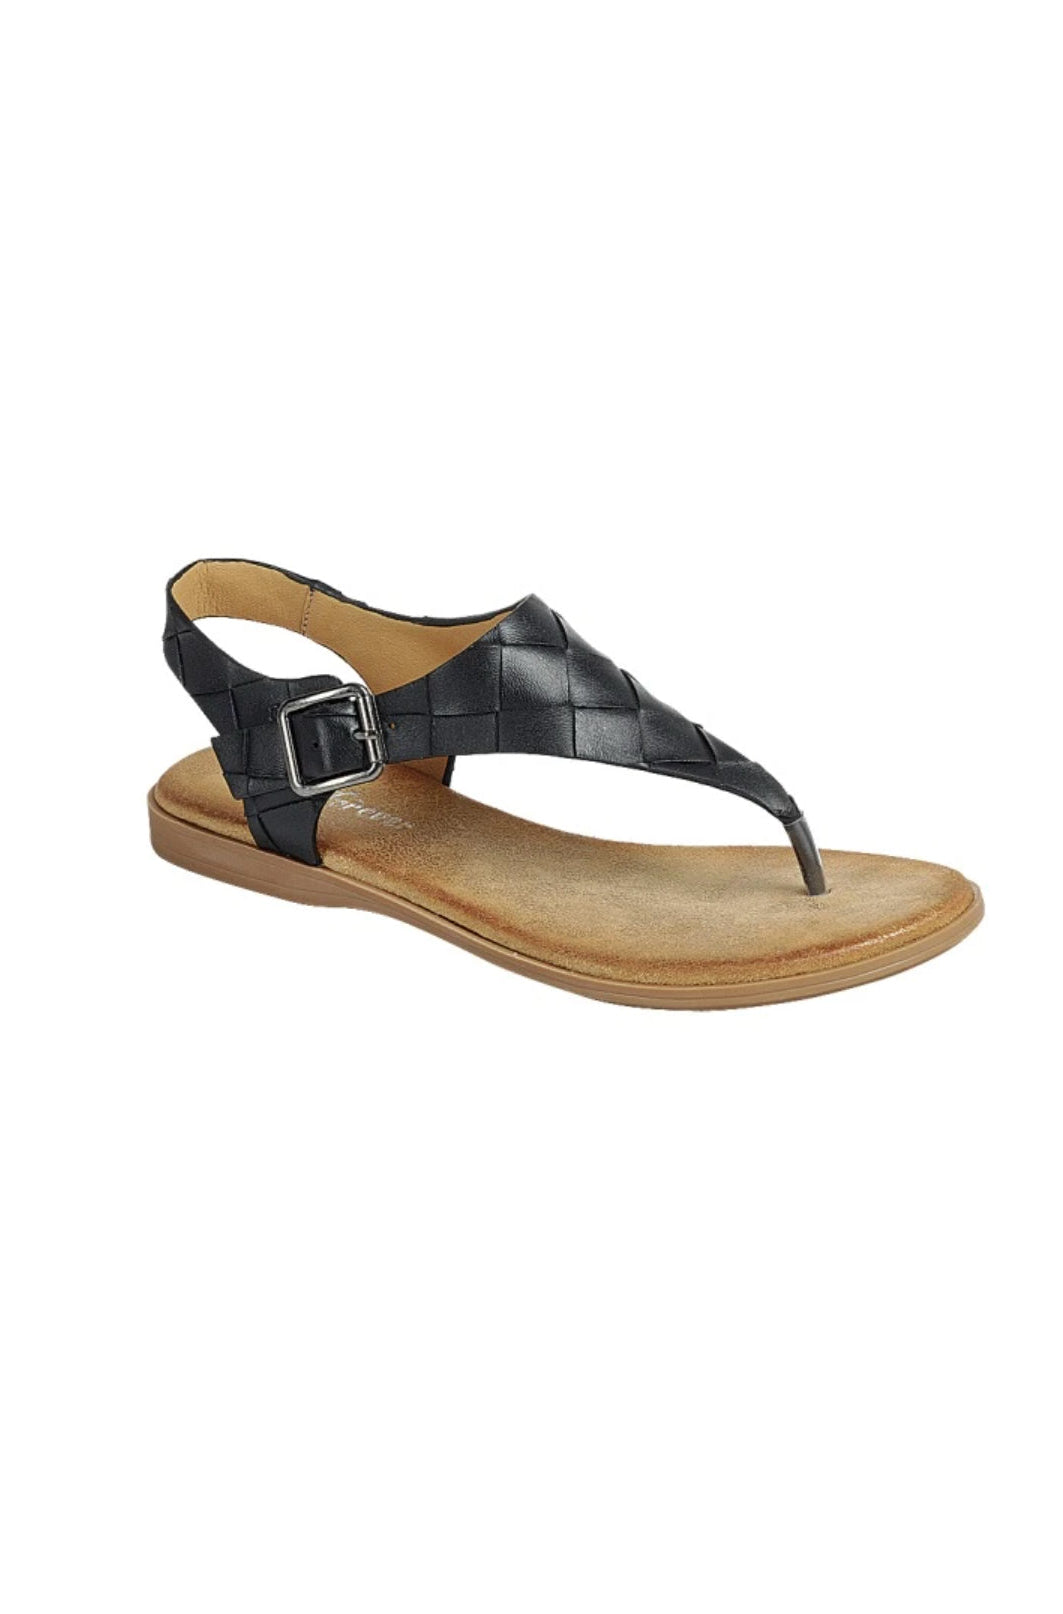 Black Braided Slingback Sandal Accessories Boutique Simplified